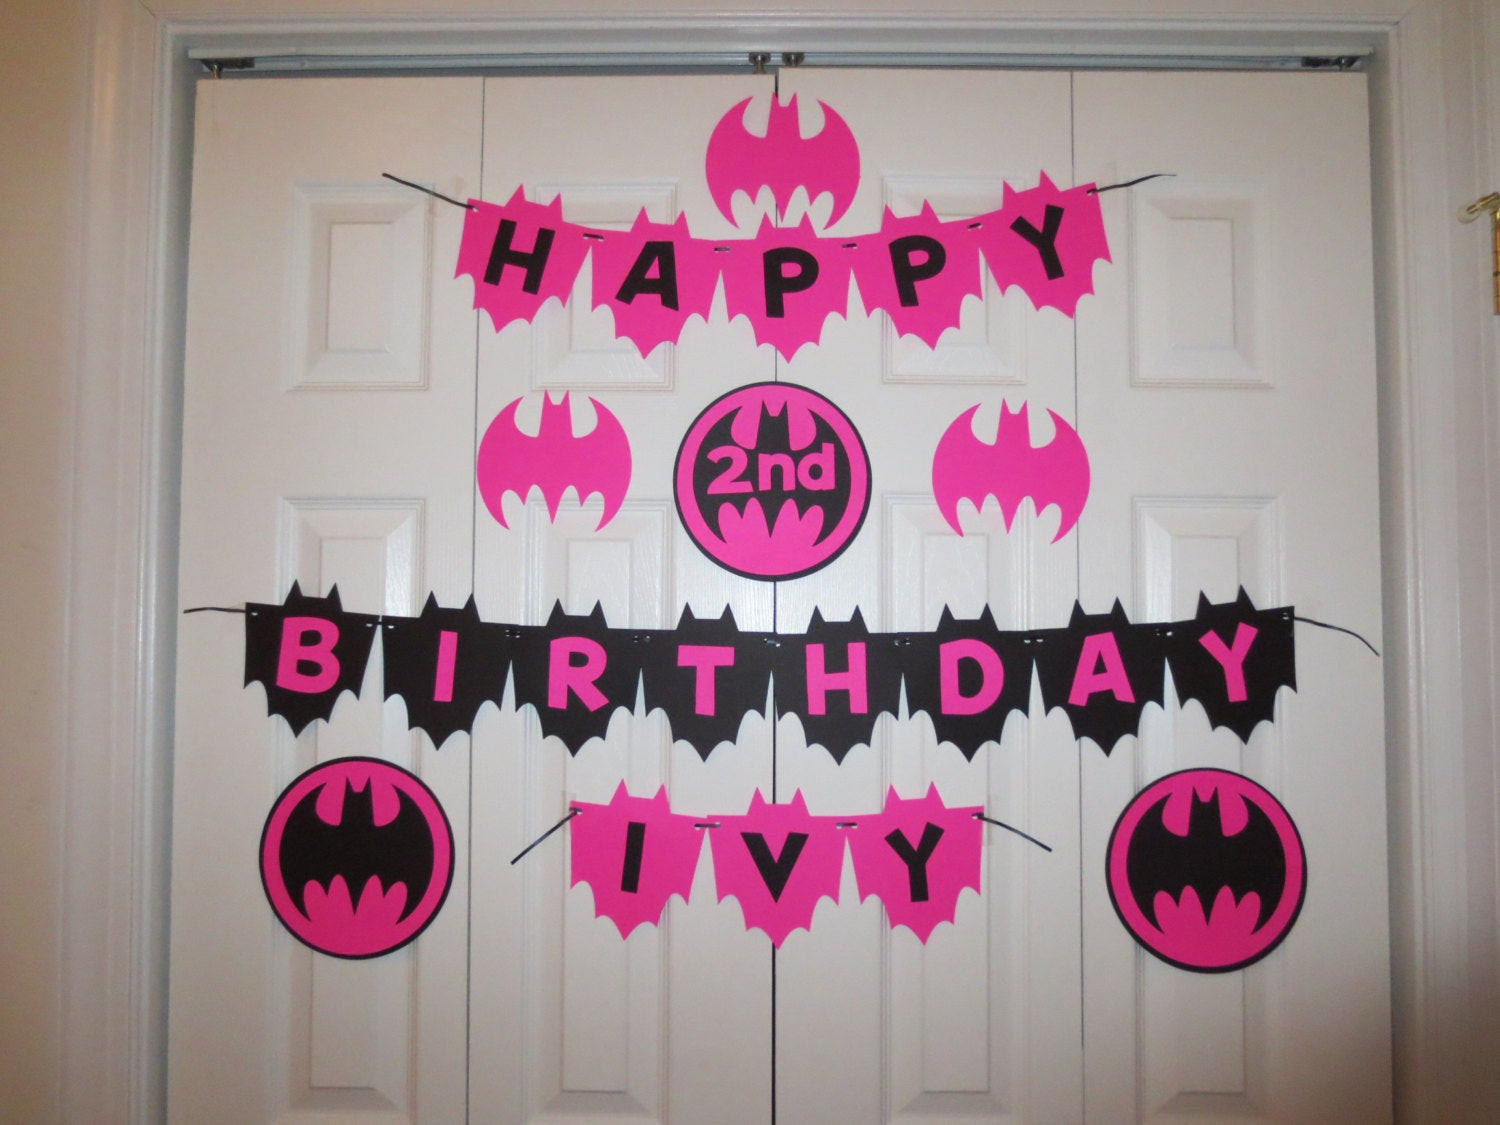 Batgirl Birthday Party Supplies
 Batgirl Happy Birthday Banner personalized with name